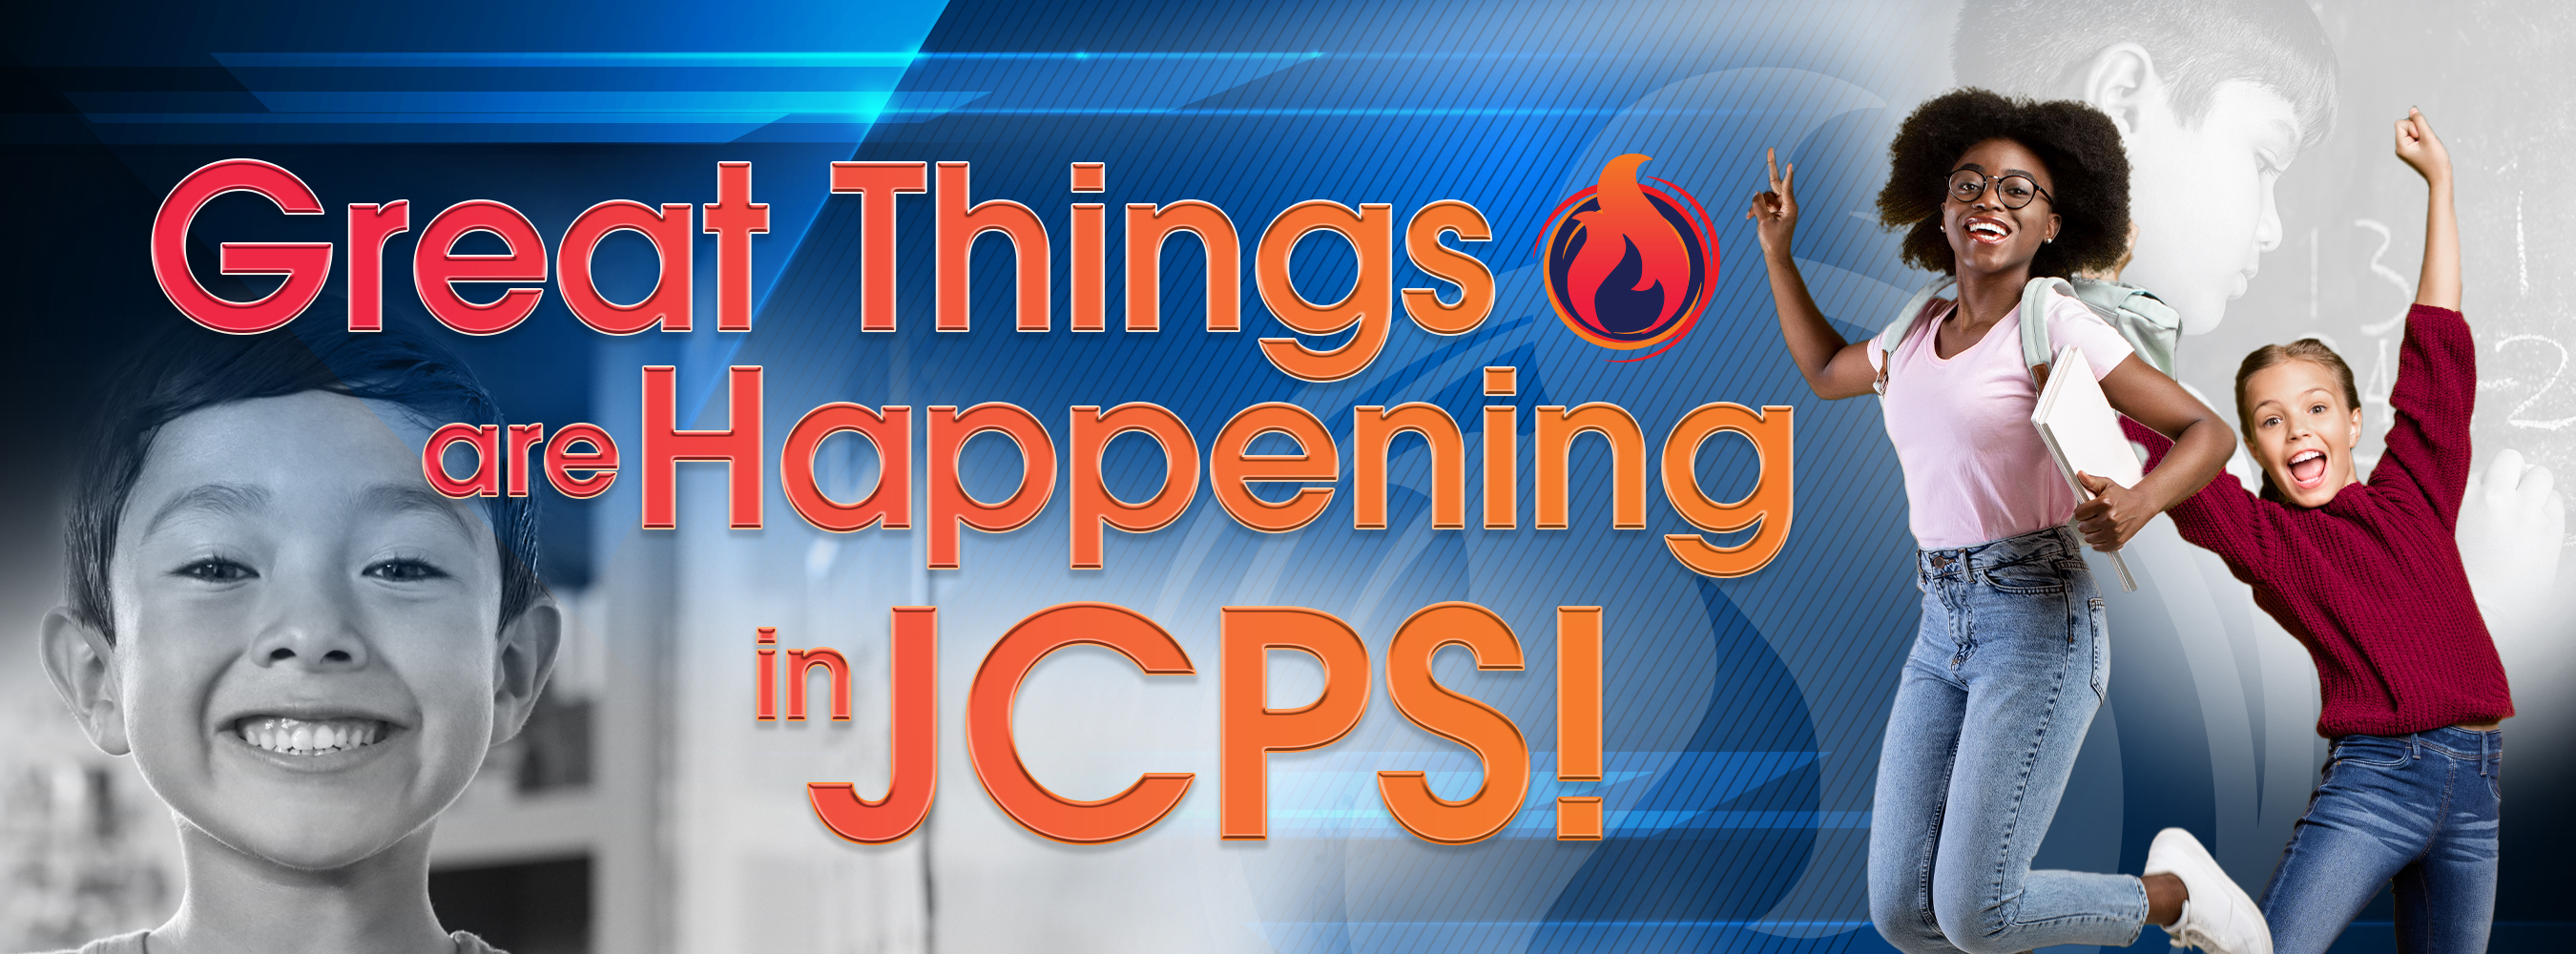 great things are happening in JCPS